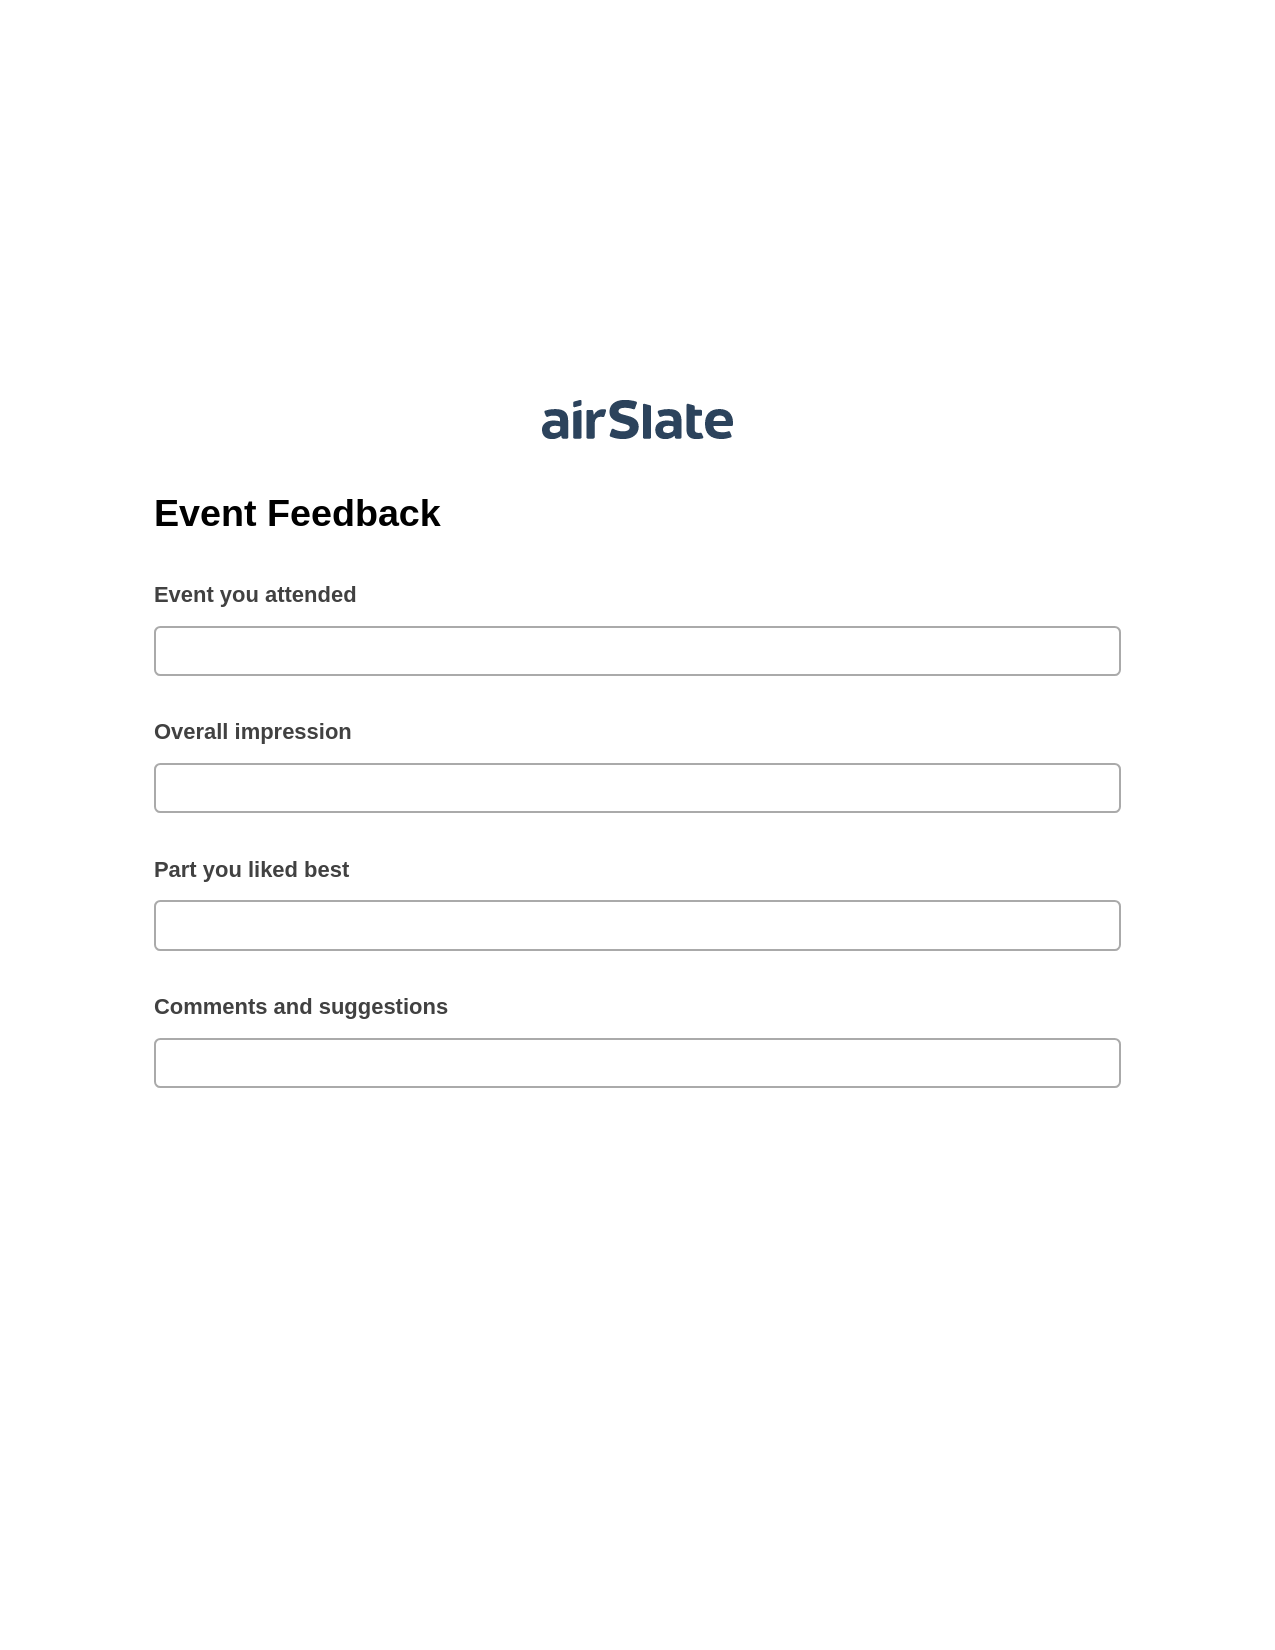 Event Feedback Pre-fill Dropdown from Airtable, Unassign Role Bot, Export to Excel 365 Bot